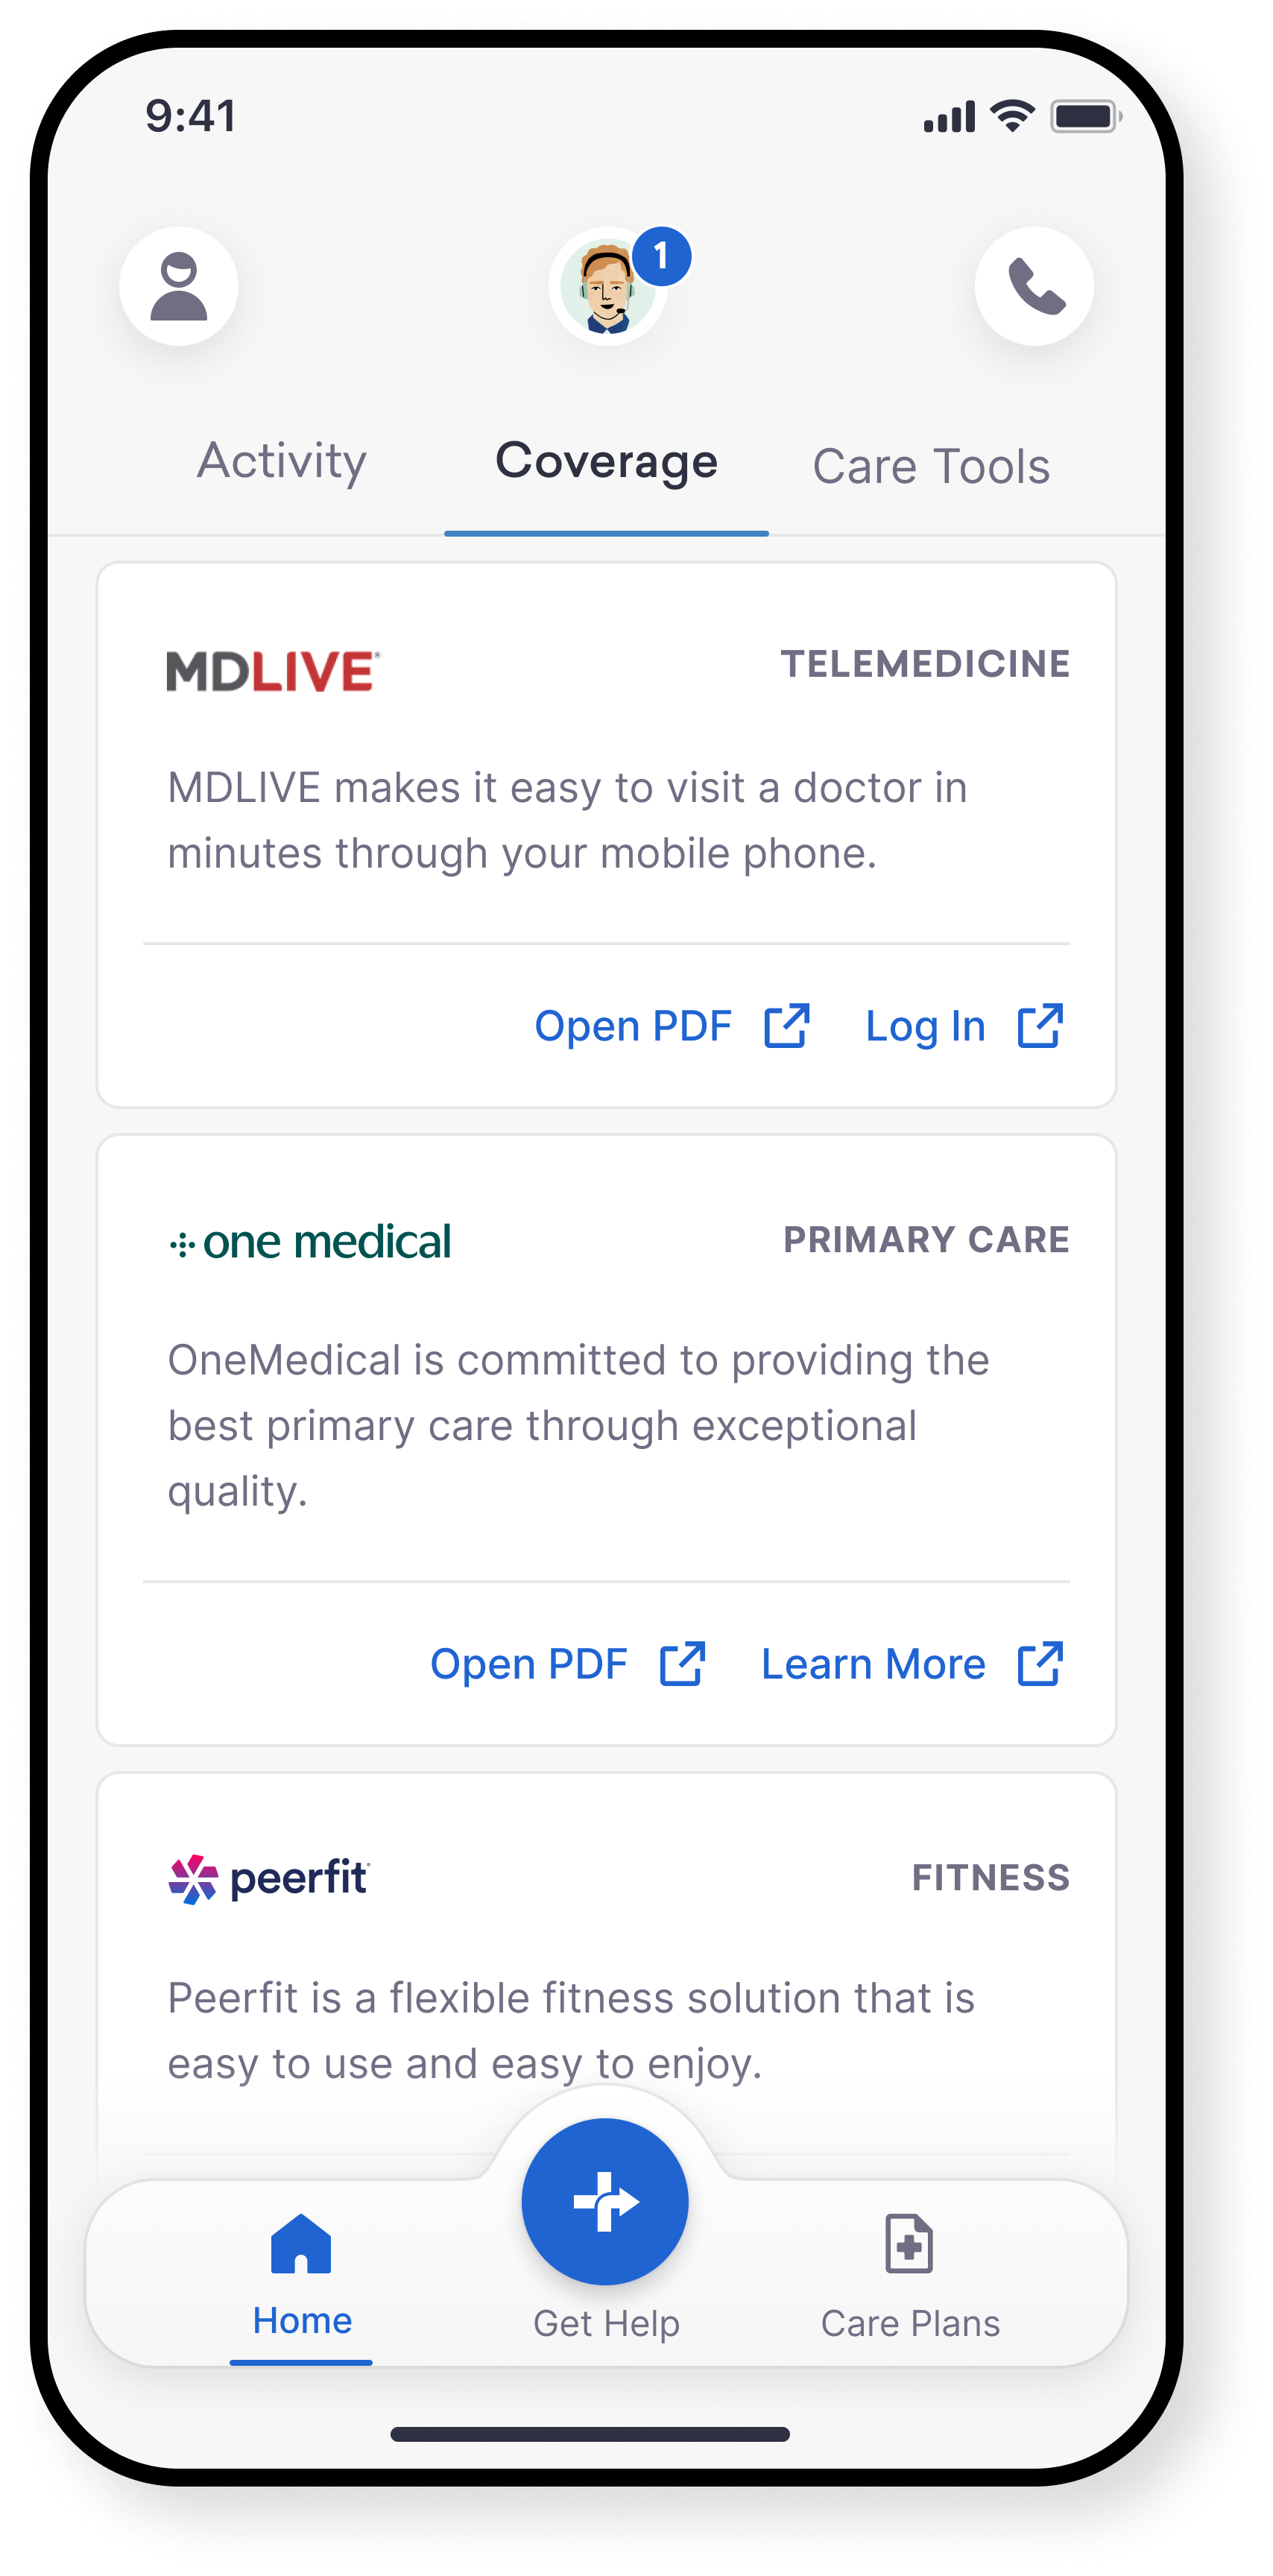 App preview image showing Care Plans screen